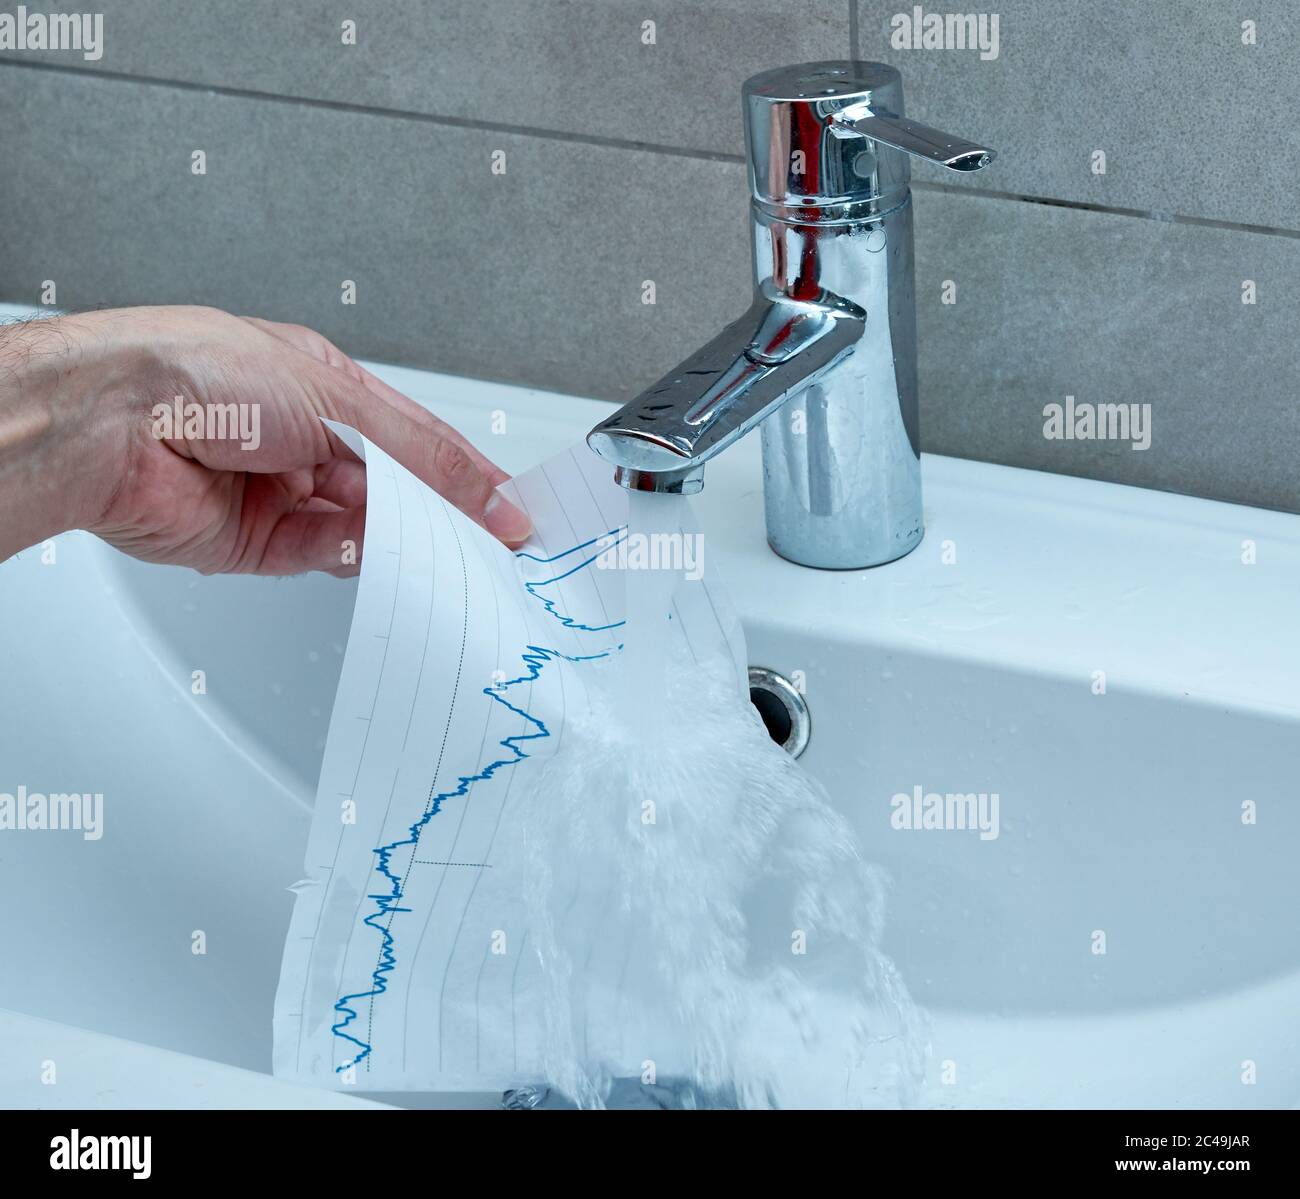 Problems with water consumption statistics. Economy concept. Stock Photo